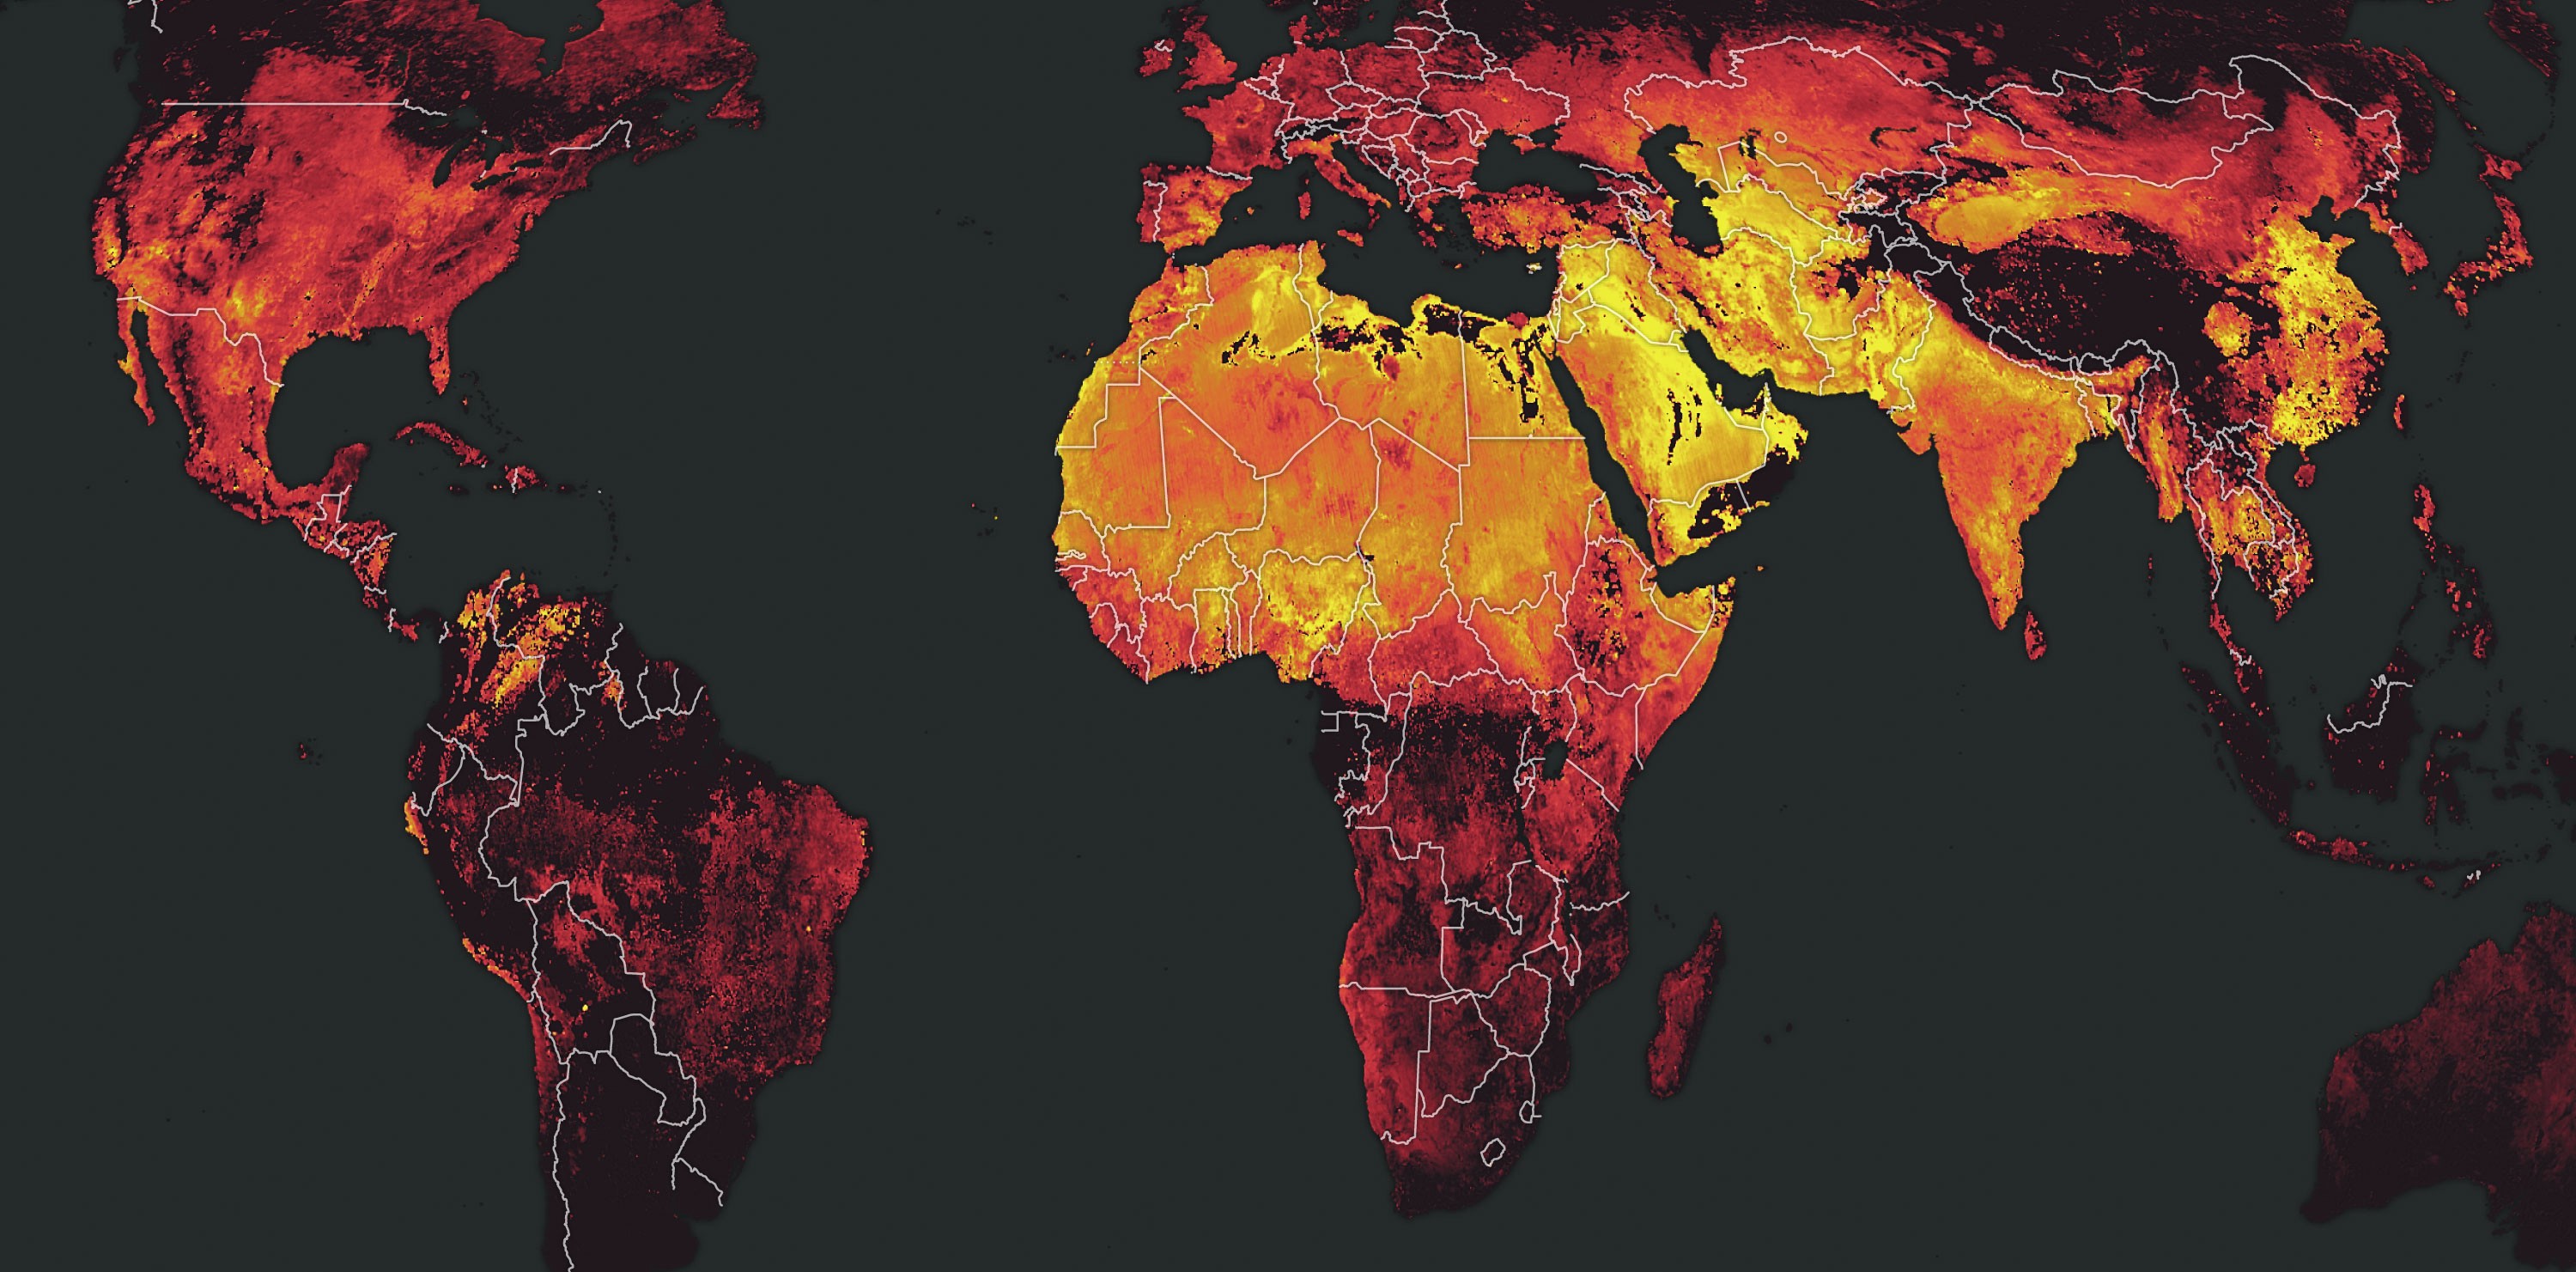 A global methane composite created by Laura Mazzaro at Descartes Labs using Sentinel-5P data. It shows average measured levels in the atmosphere from January to August, 2019. Brighter areas represent higher registrations of methane. Darker areas represent either low methane concentrations or no data. Curious why the Sahara is so bright? Read on below.